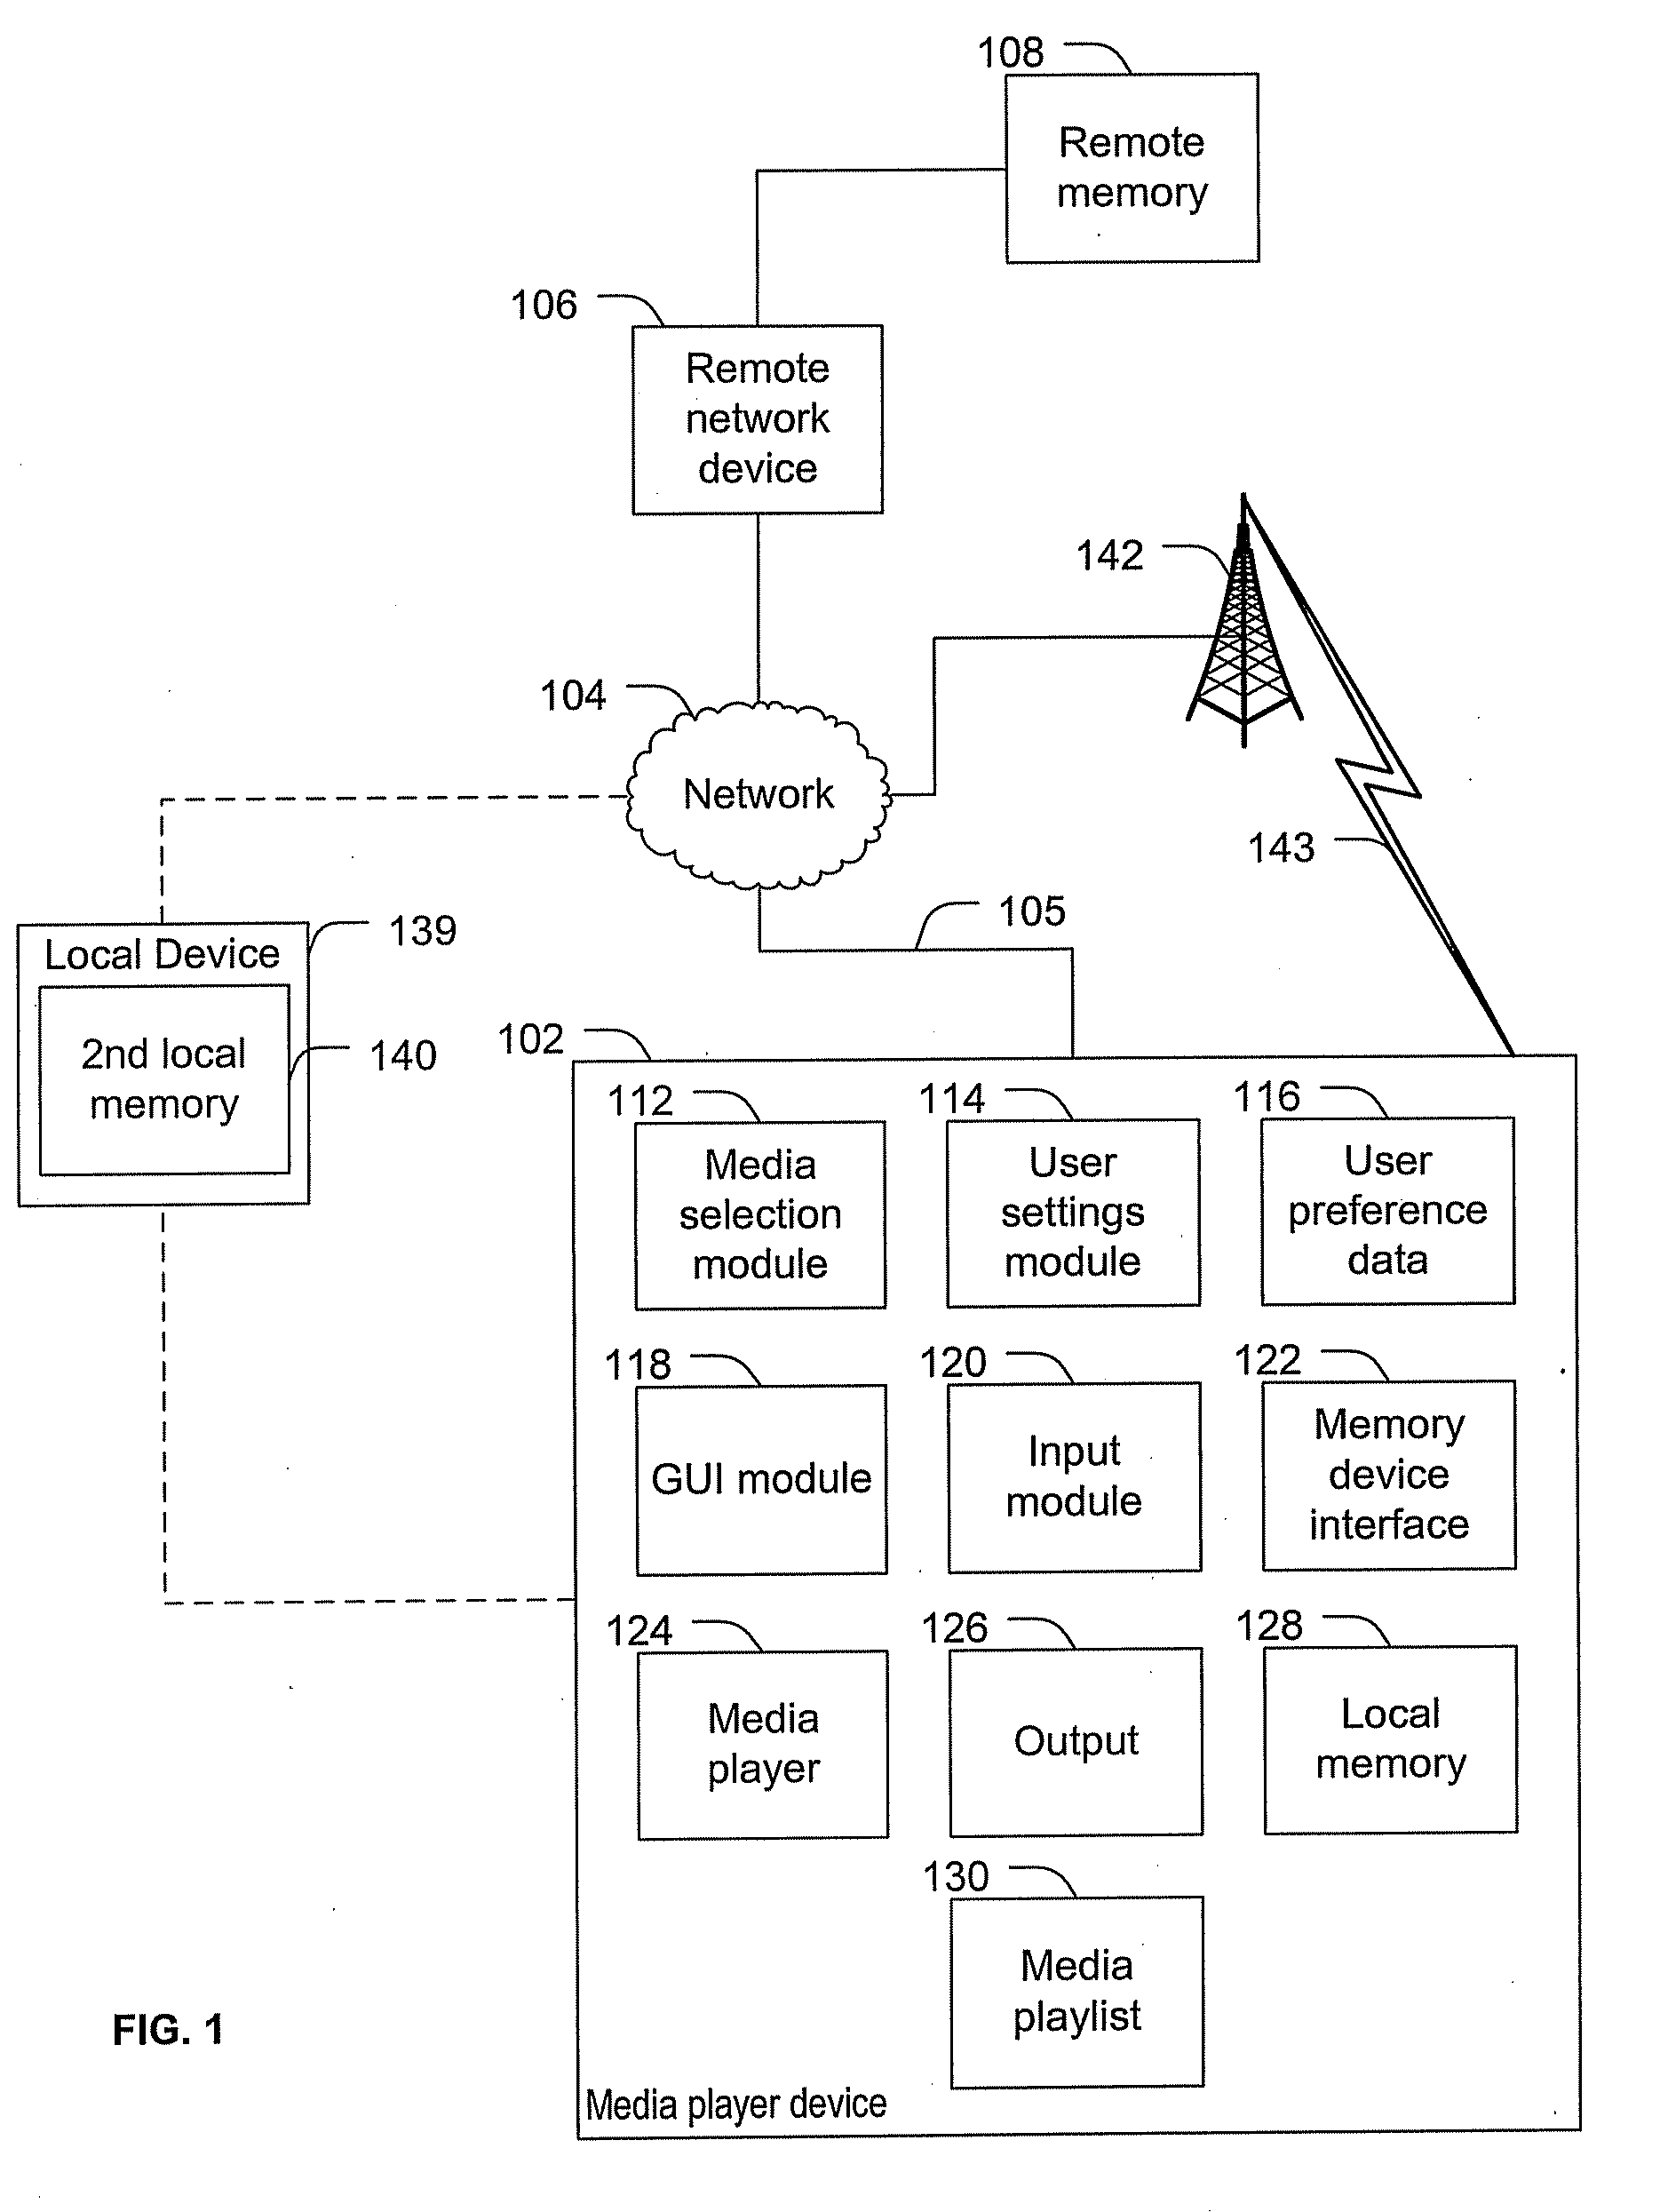 Systems and methods to select media content